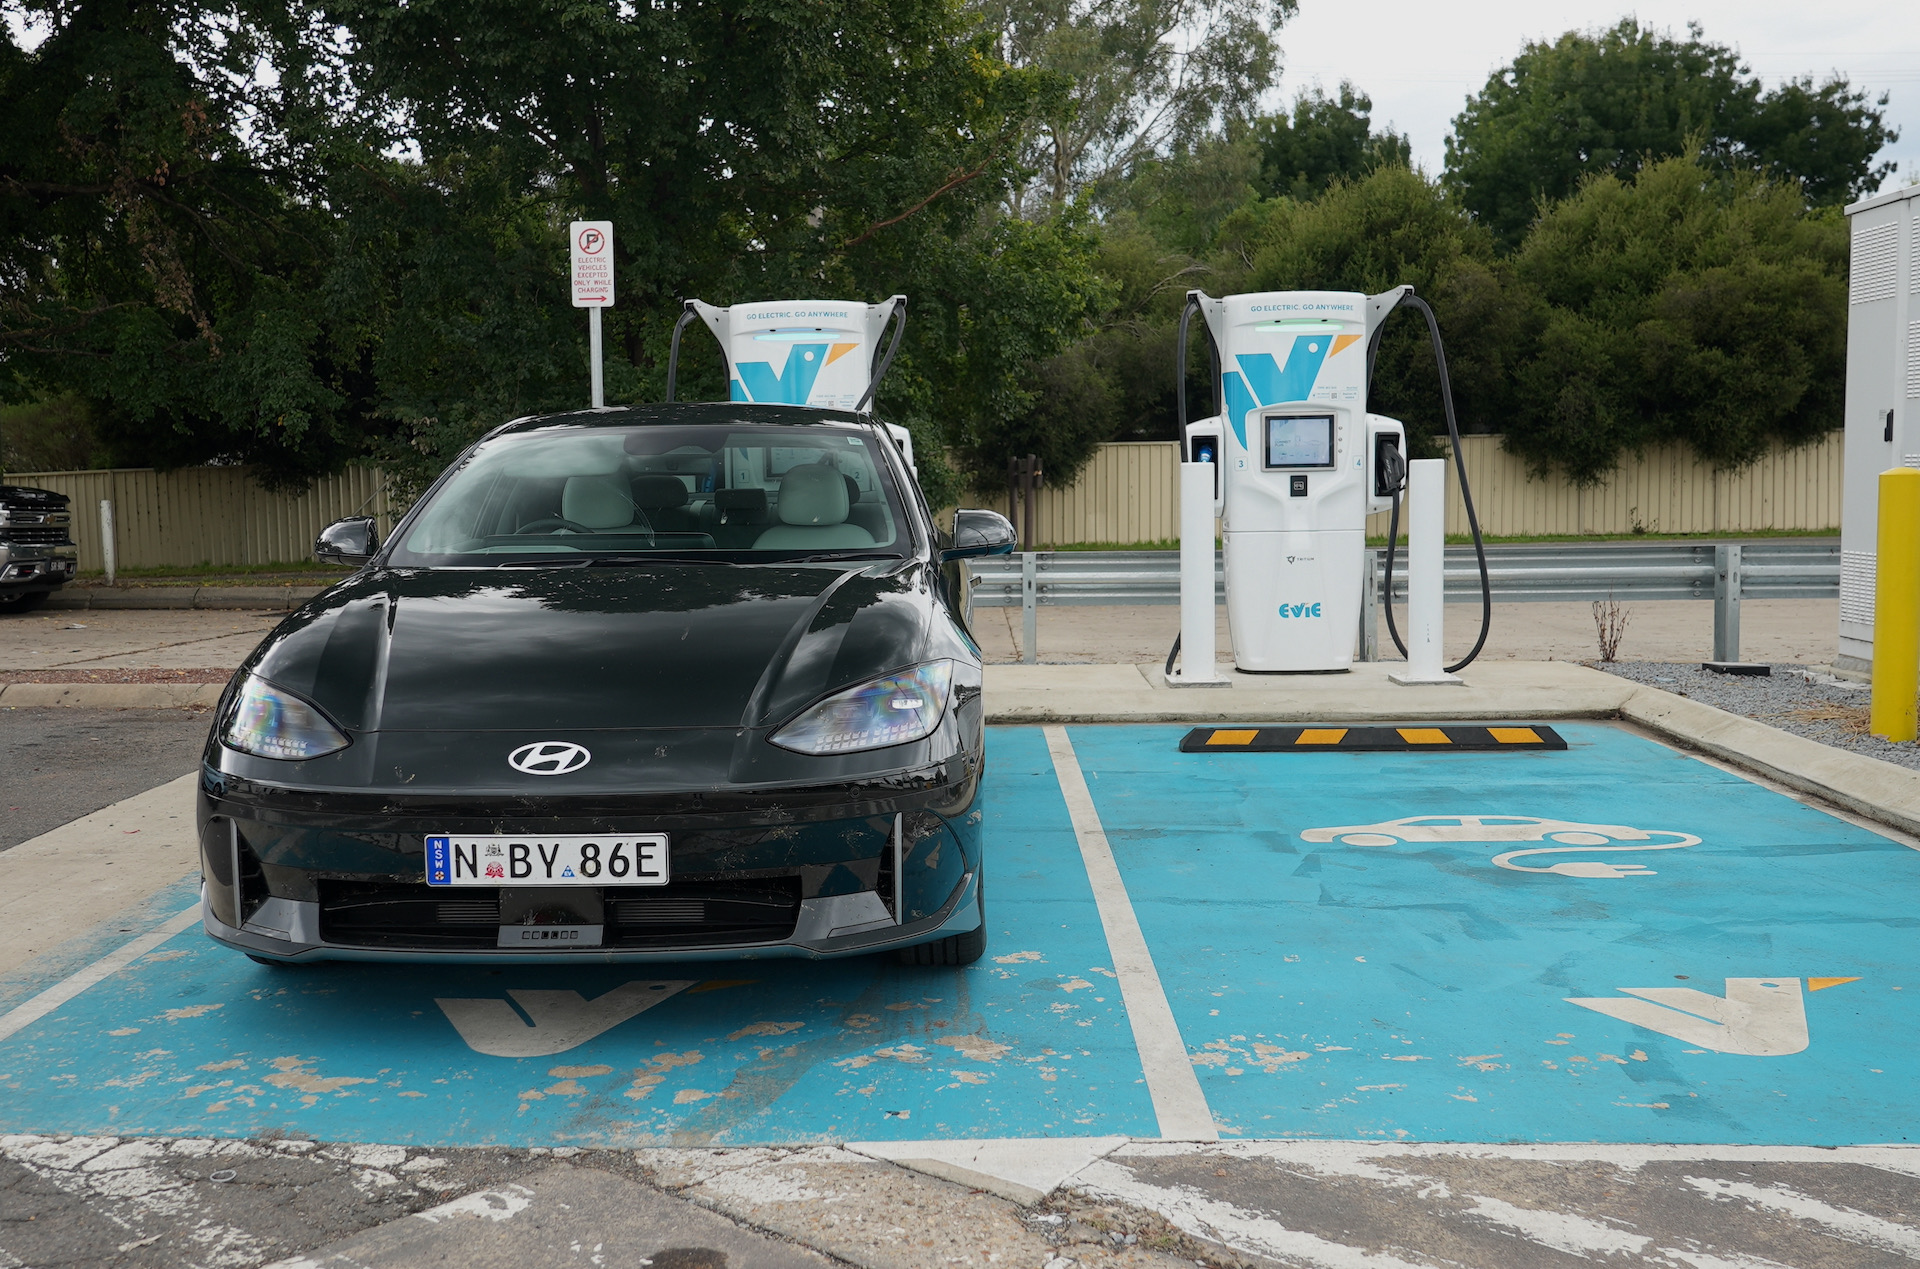 Fuel efficiency standards coming to Australia with new electric vehicle policy